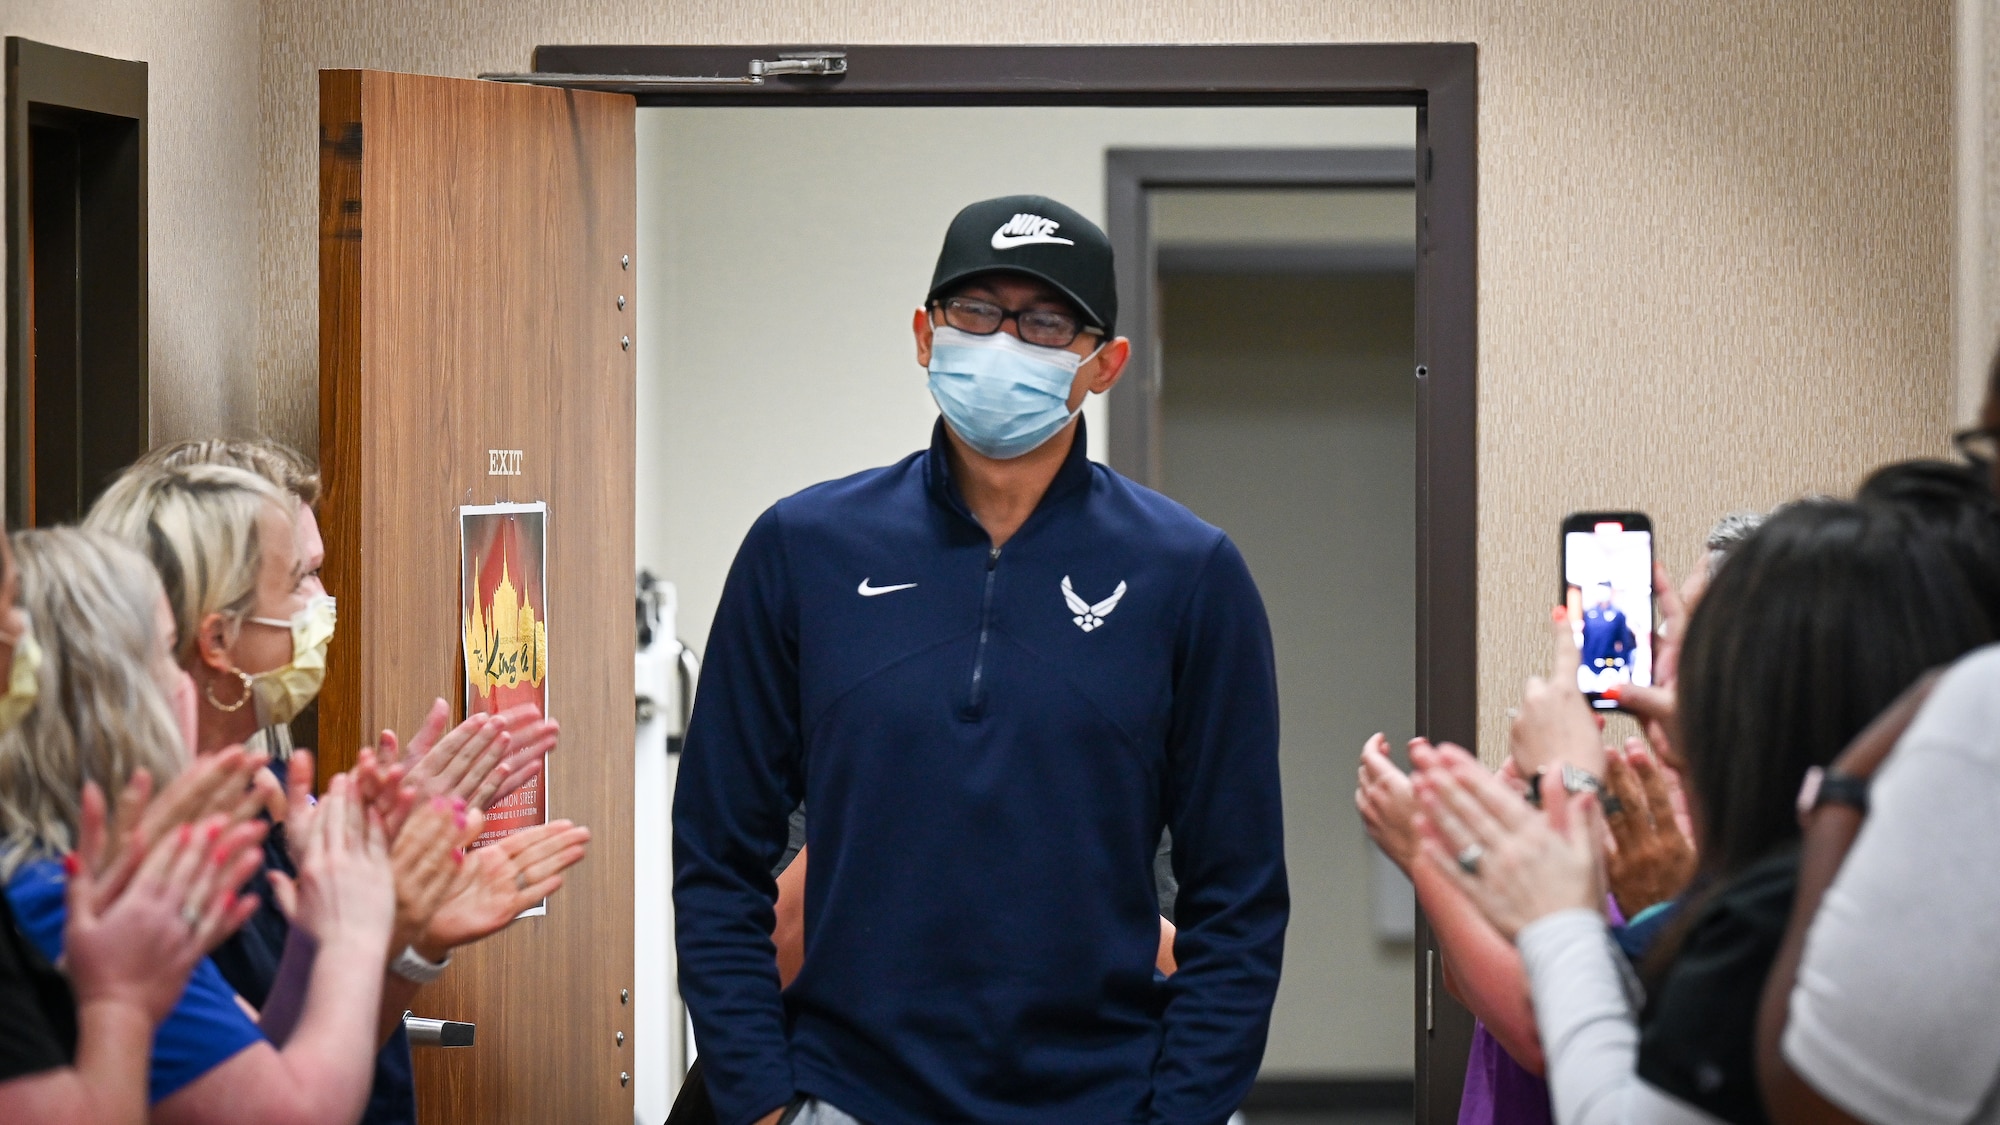 Senior Airman Eleazar Hernandez, 2nd Maintenance Squadron aerospace ground equipment journeyman, is applauded by medical professionals after his final chemotherapy treatment at the CHRISTUS Health Shreveport-Bossier medical center, Louisiana, July 2, 2021. Hernandez had Hodgkin’s lymphoma, a cancer of the lymphatic system and part of the immune system. (U.S. Air Force photo by Airman 1st Class Jonathan E. Ramos)